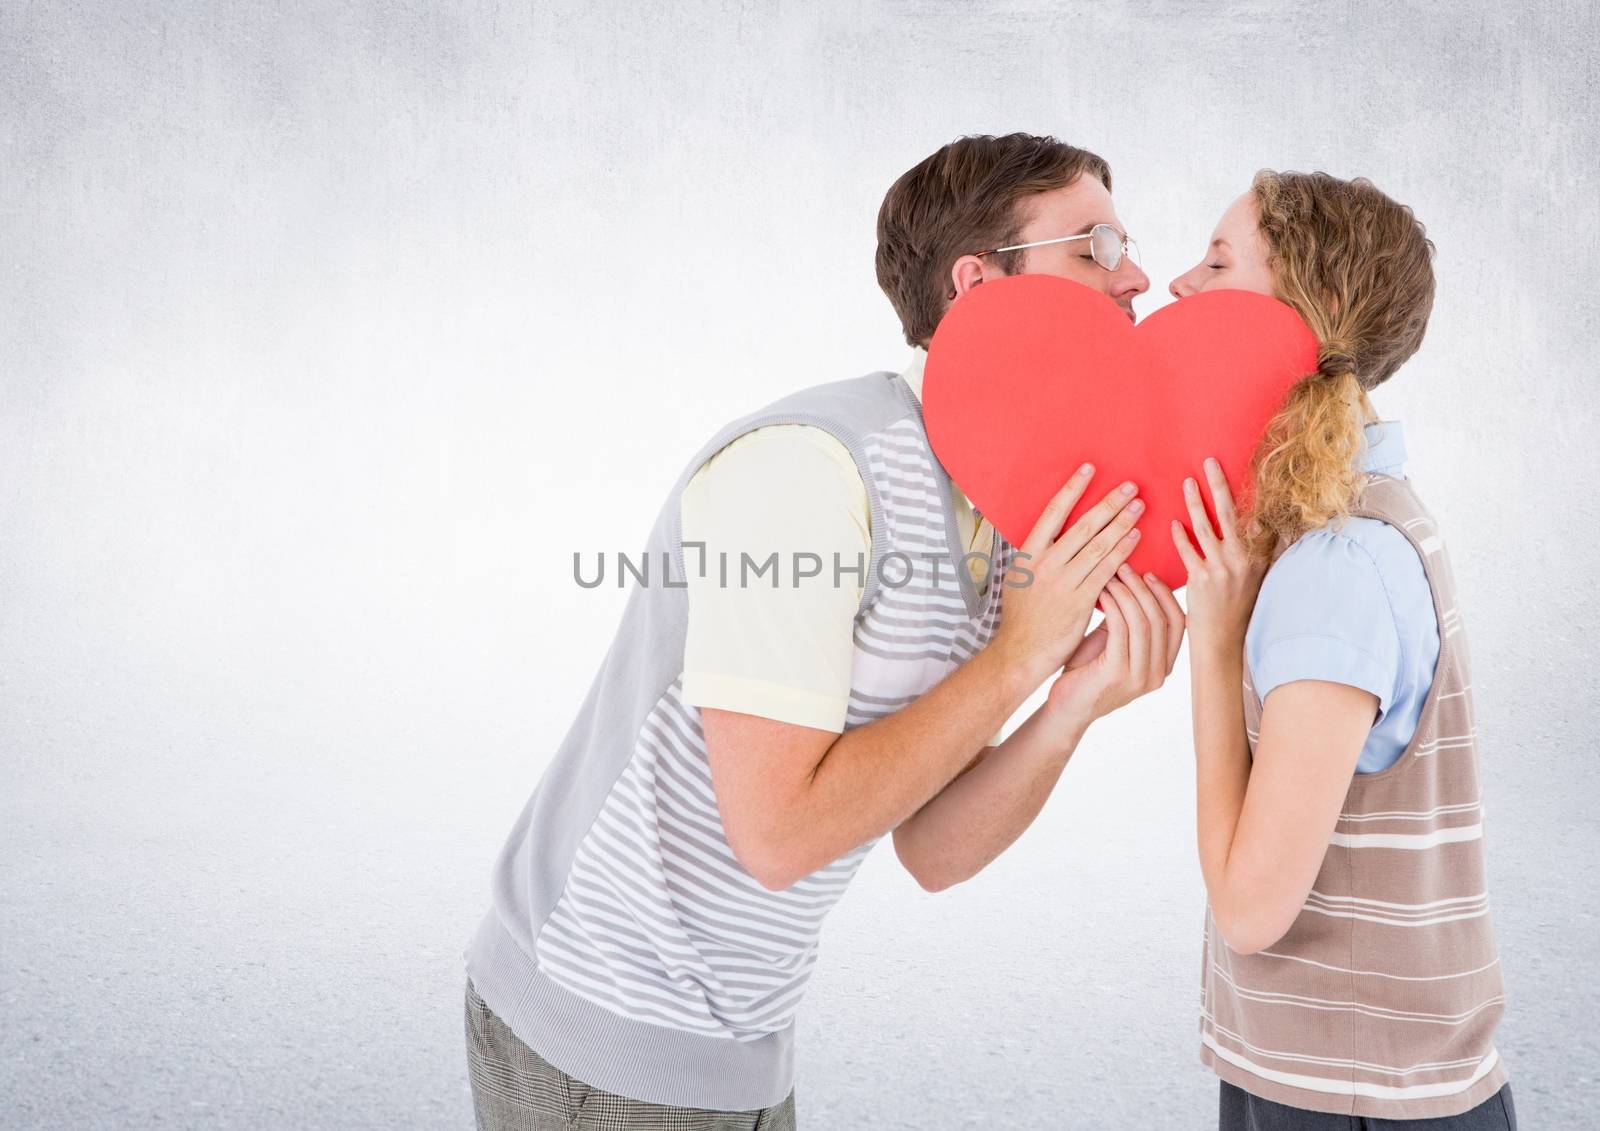 Romantic couple kissing behind heart against white background